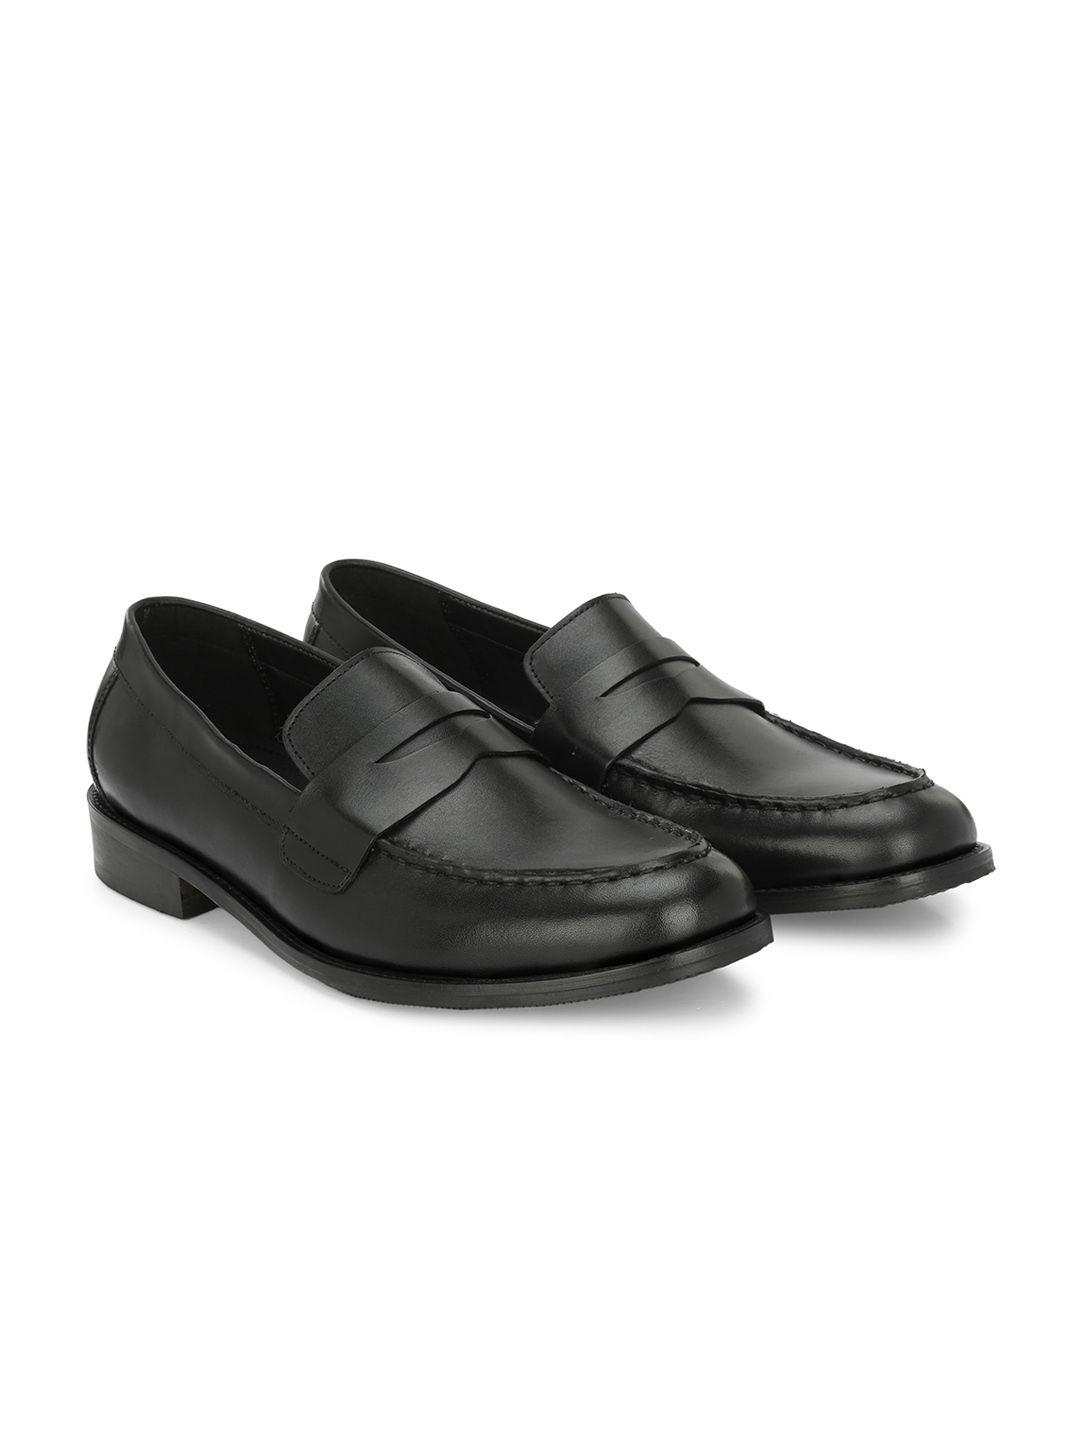 carlo romano men leather formal loafers